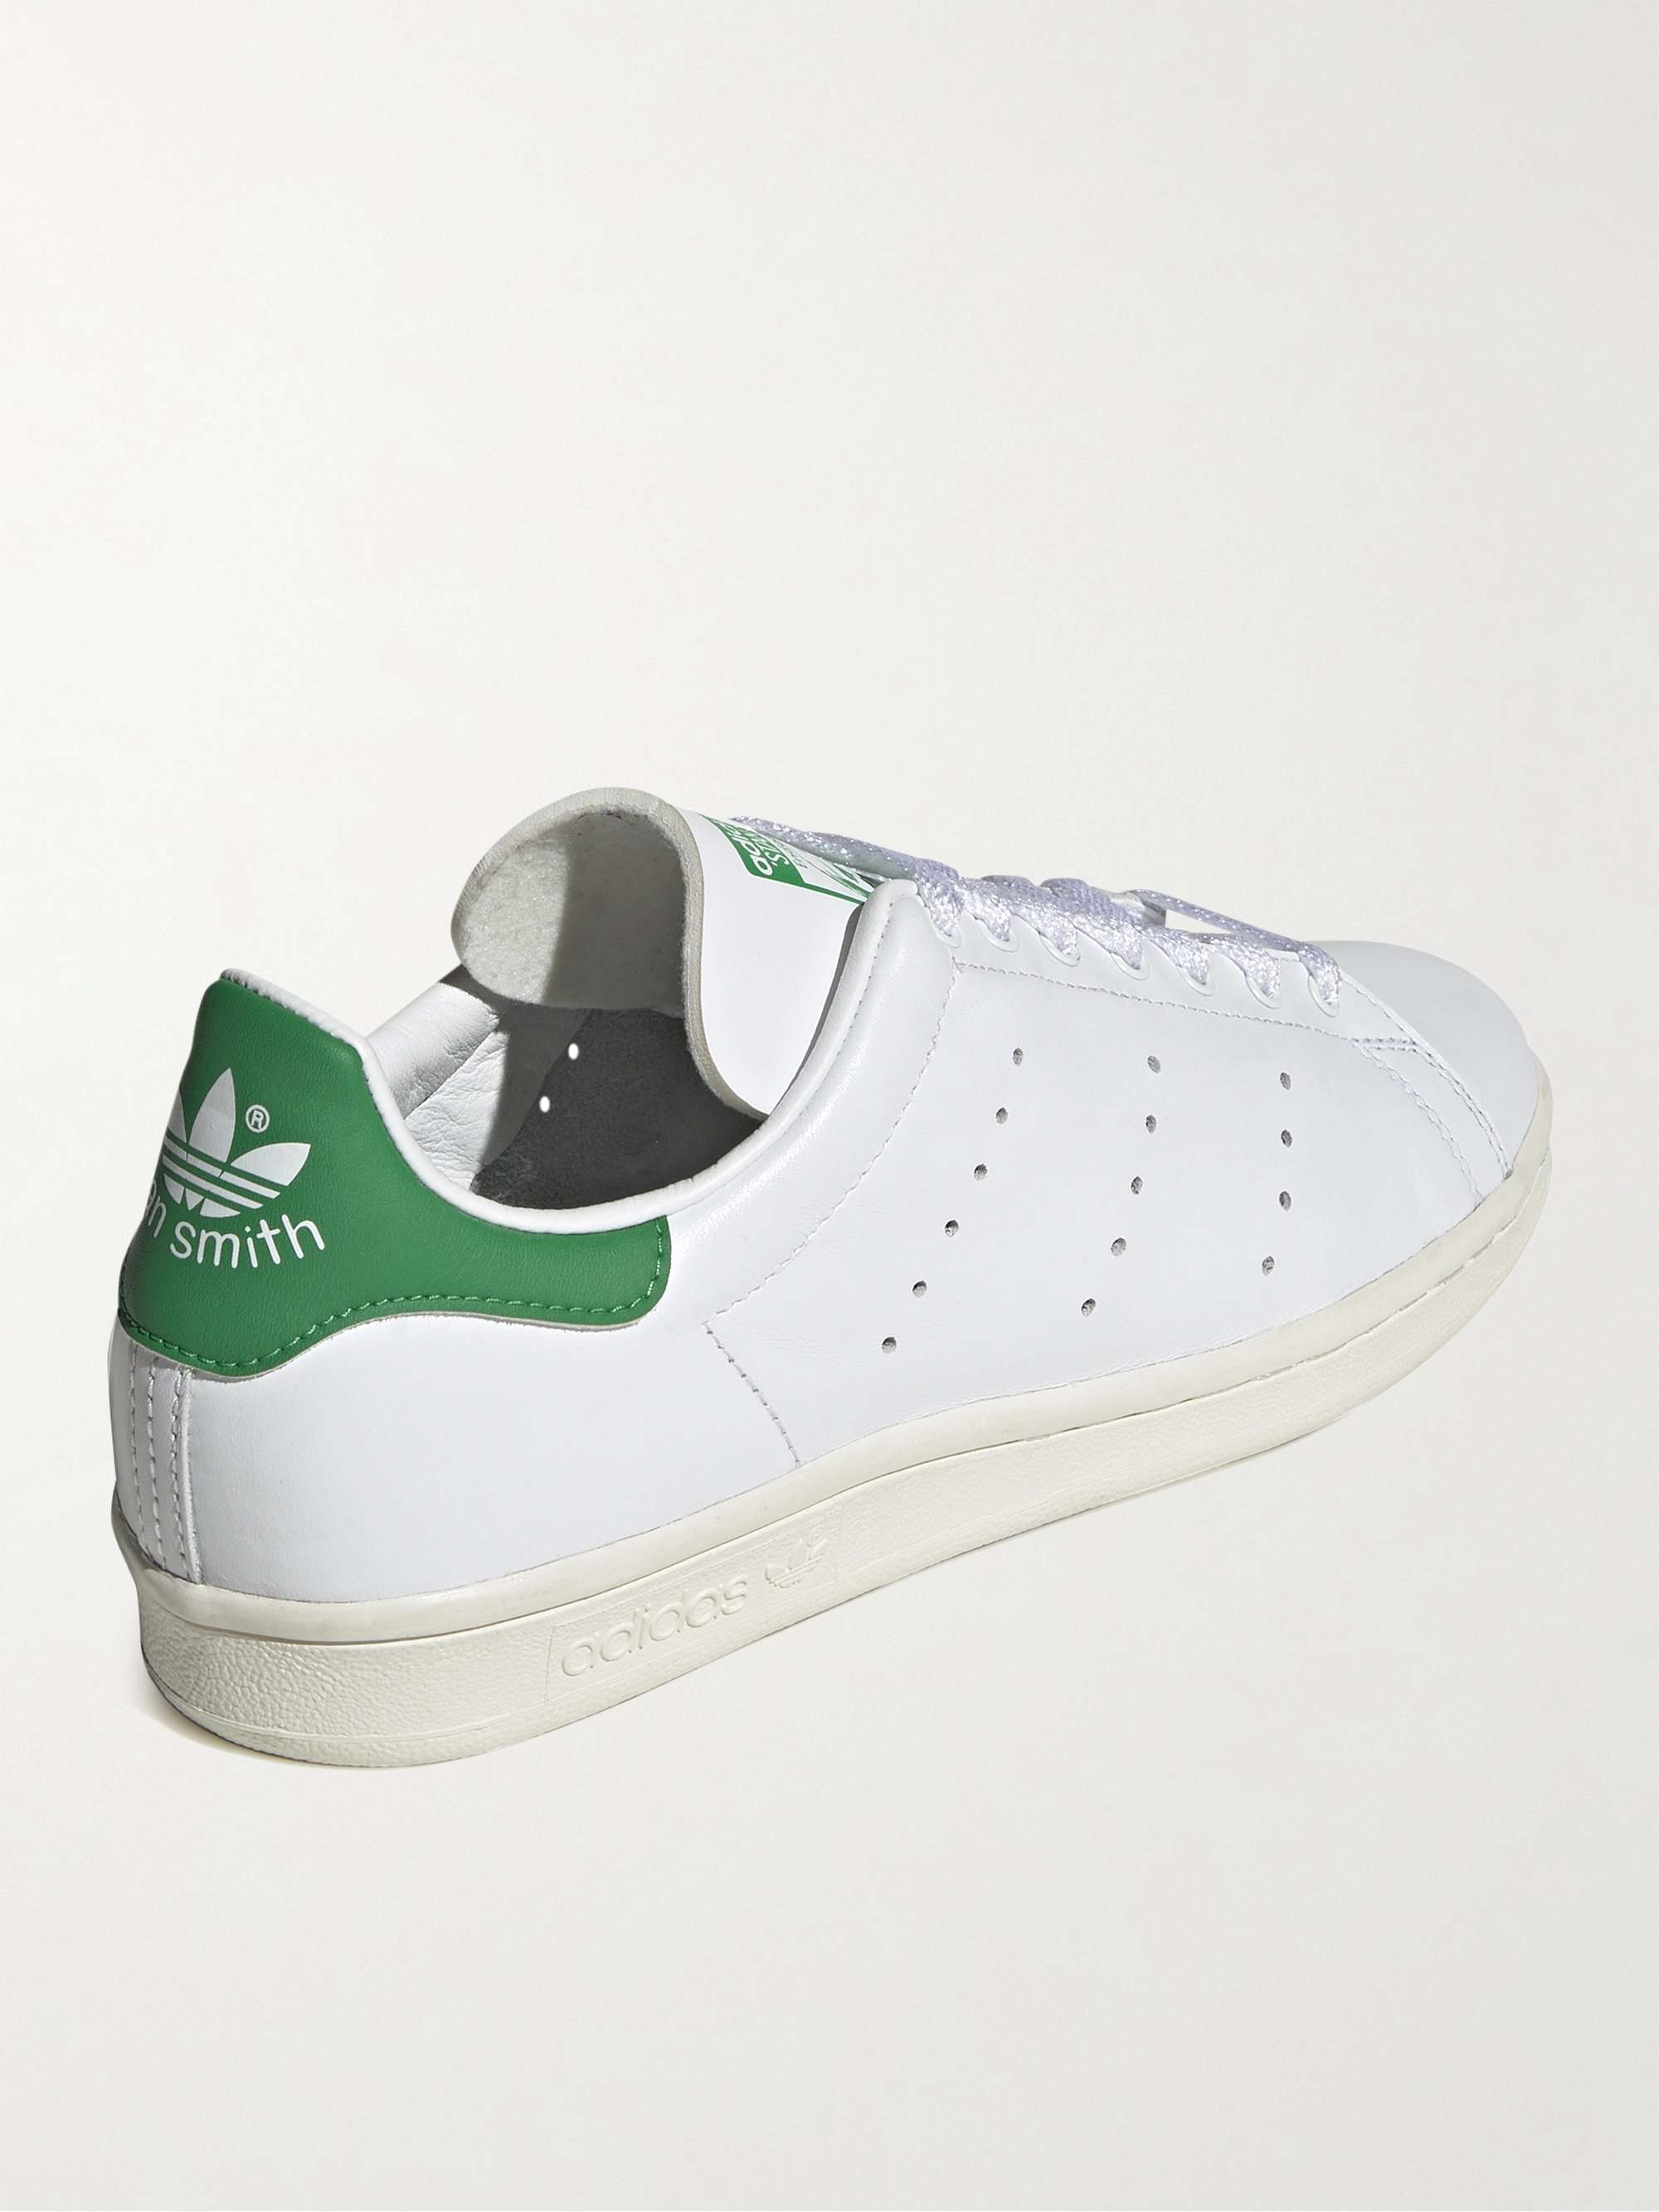 ADIDAS ORIGINALS Stan Smith 80s Leather Sneakers | MR PORTER